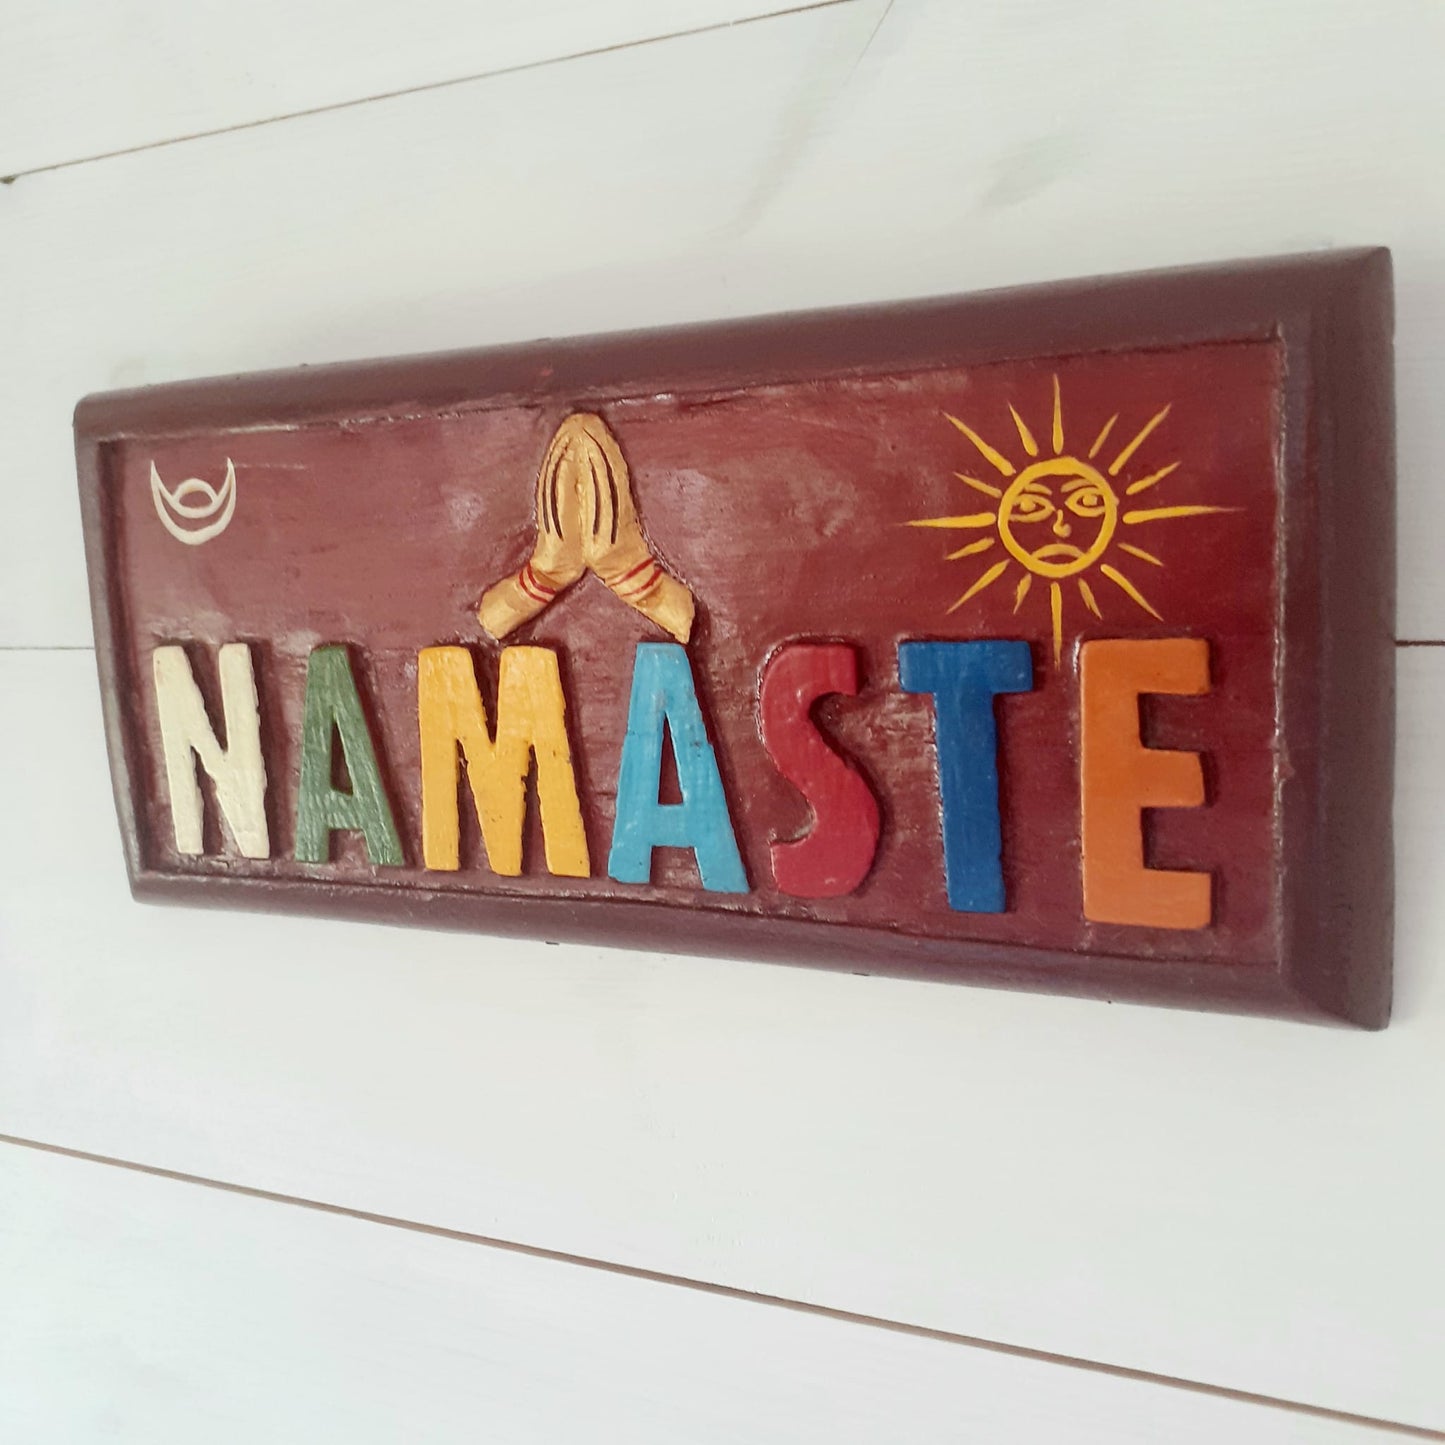 Namaste sign wooden wall hanging sun and moon  25 x 10 cm